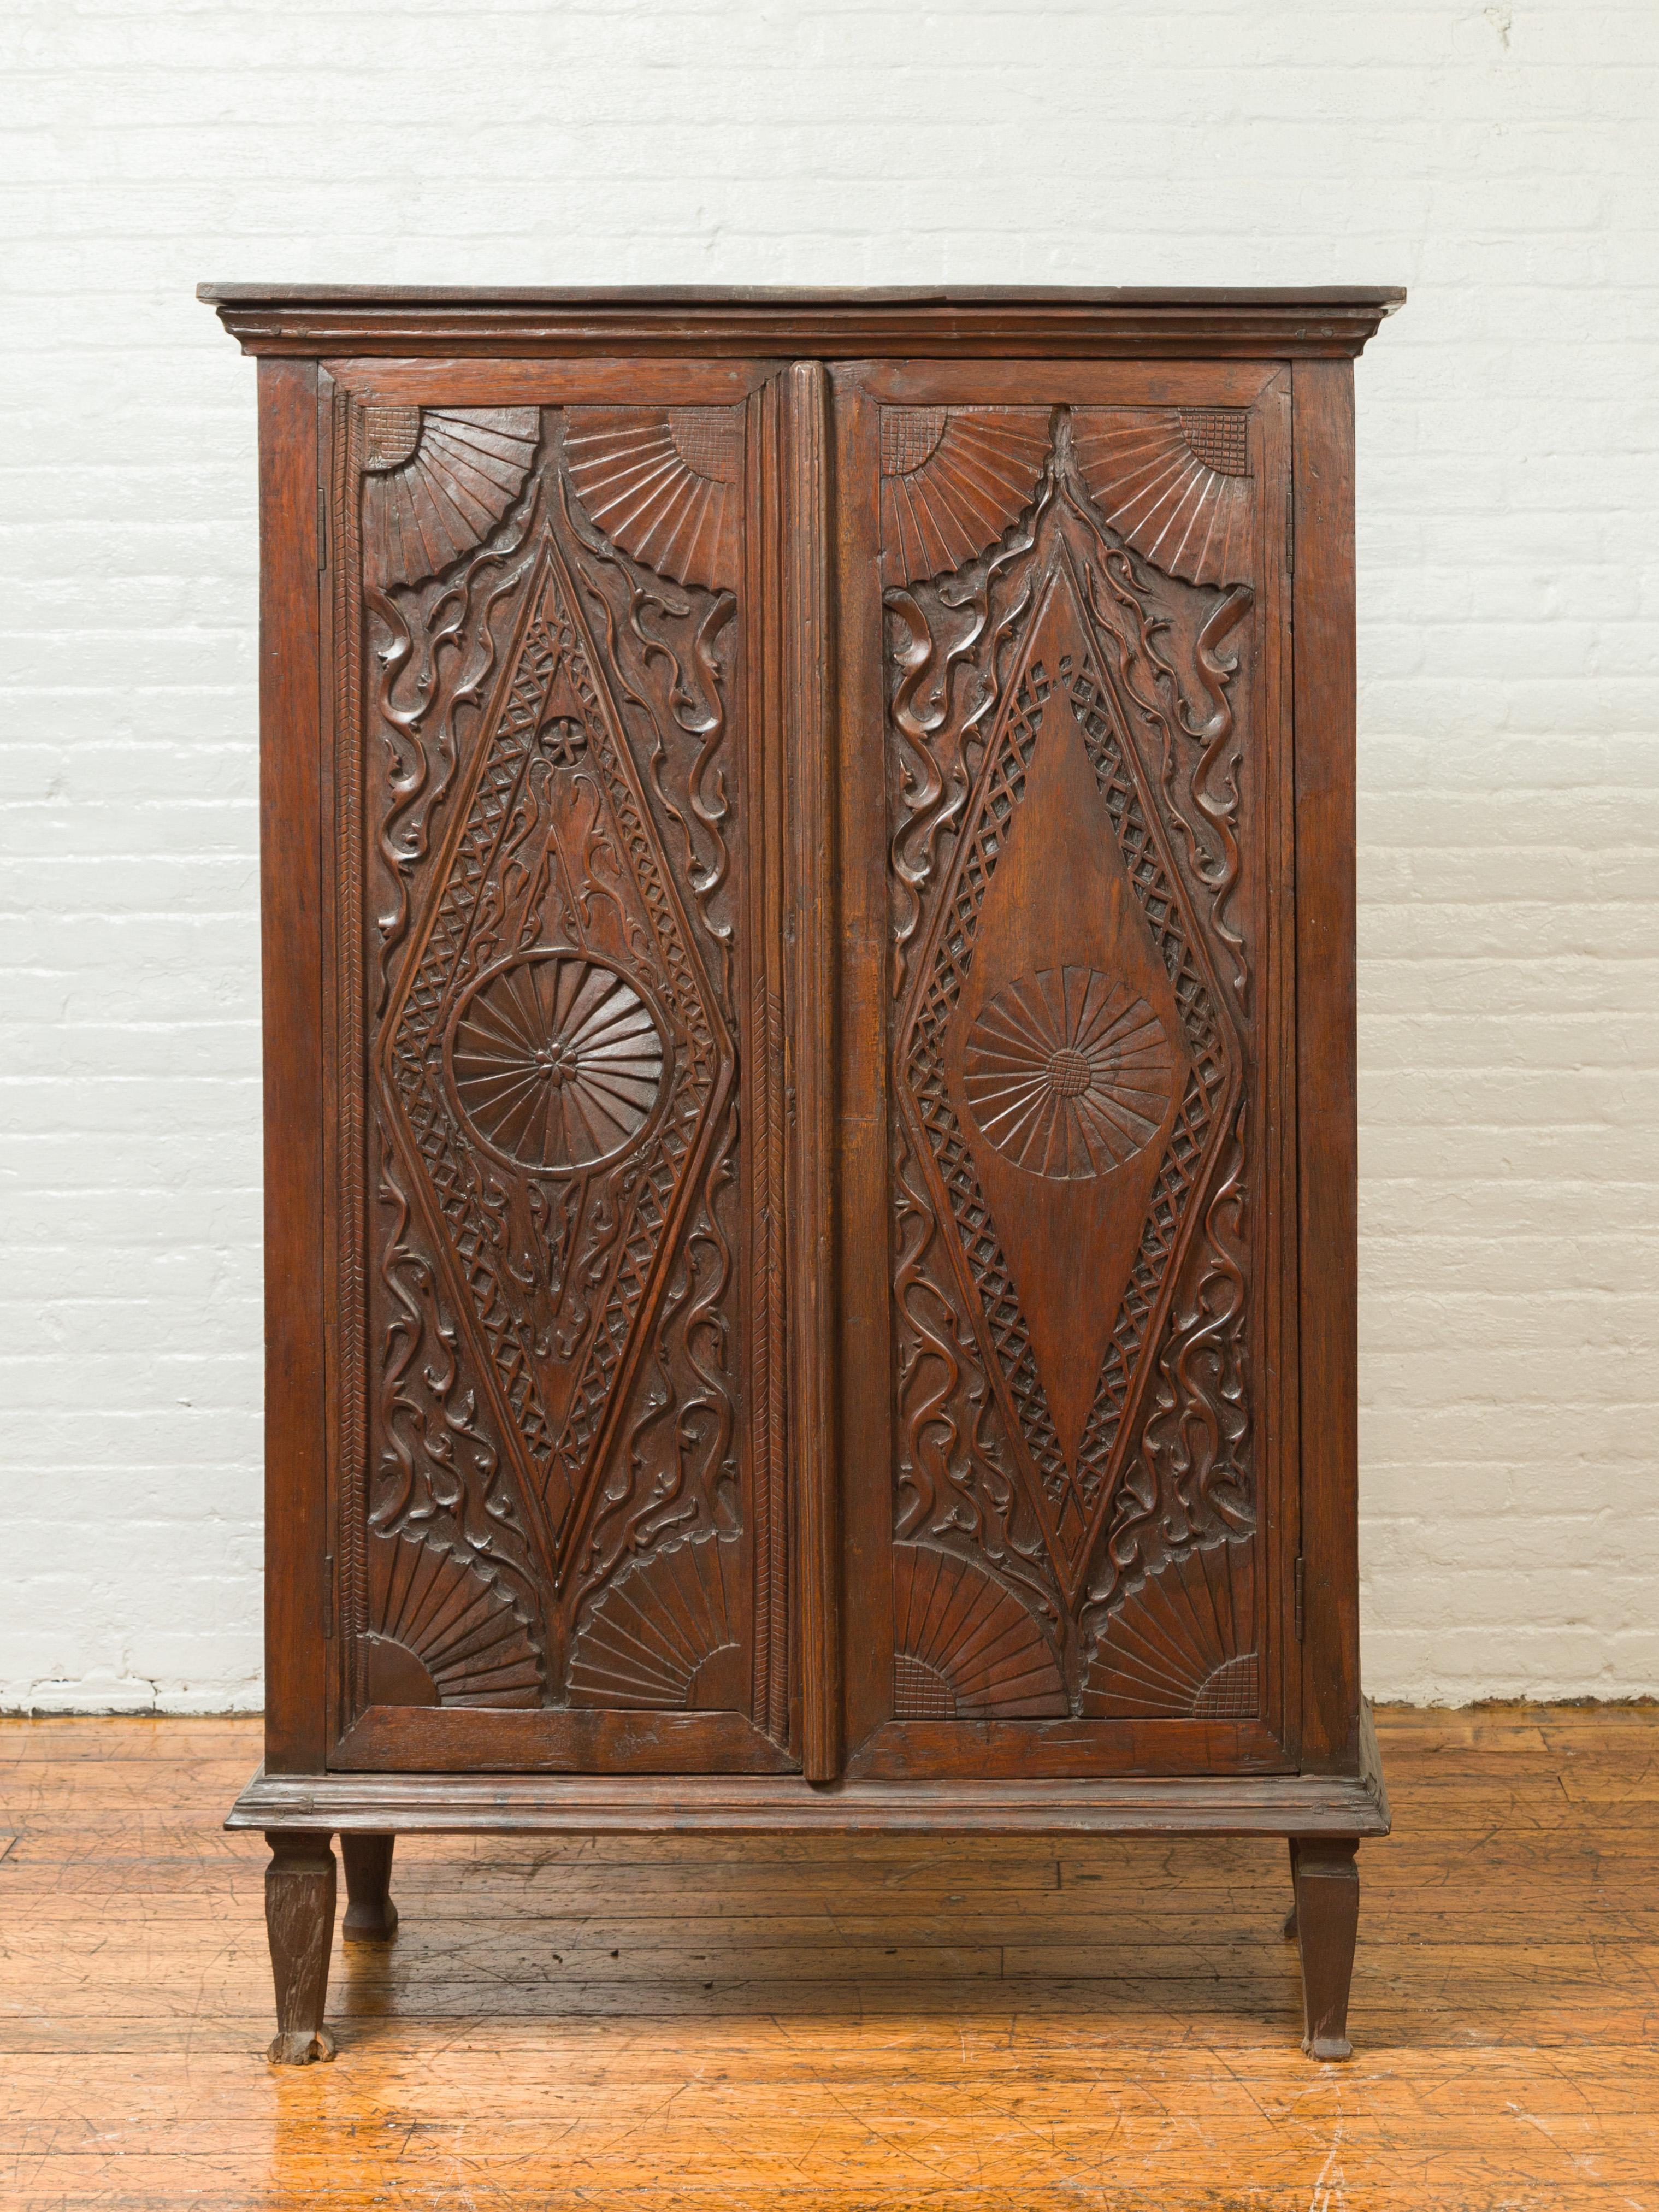 An antique Indonesian wooden cabinet from the 19th century, with carved diamond and radiating motifs. Crafted in Indonesia during the 19th century, this wooden cabinet features a beveled cornice sitting above two intricately carved doors, each